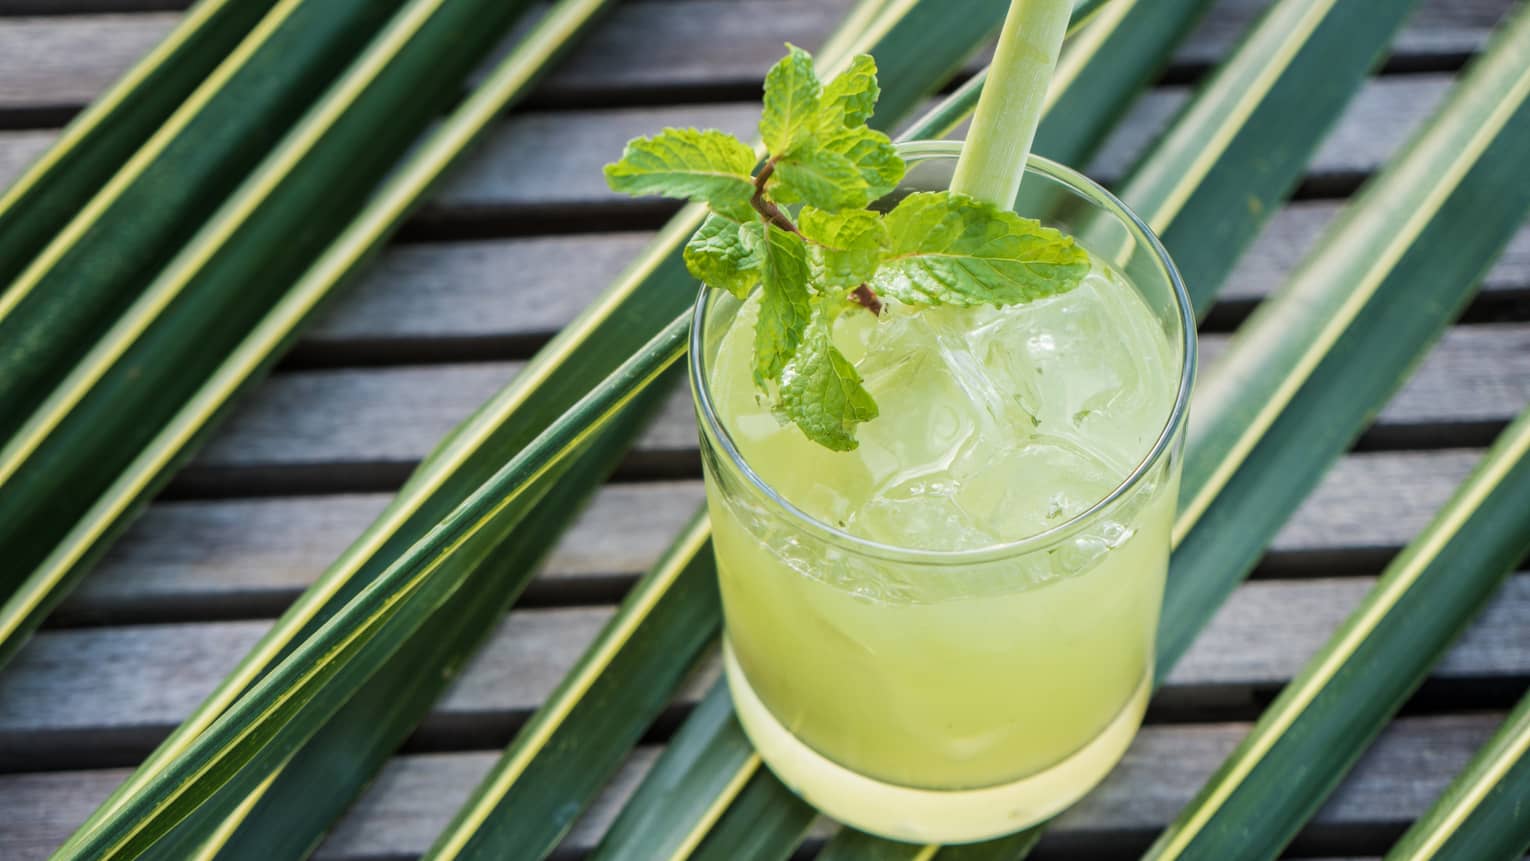 A yellow cocktail with a sprig on mint in it resting on greenery on a table